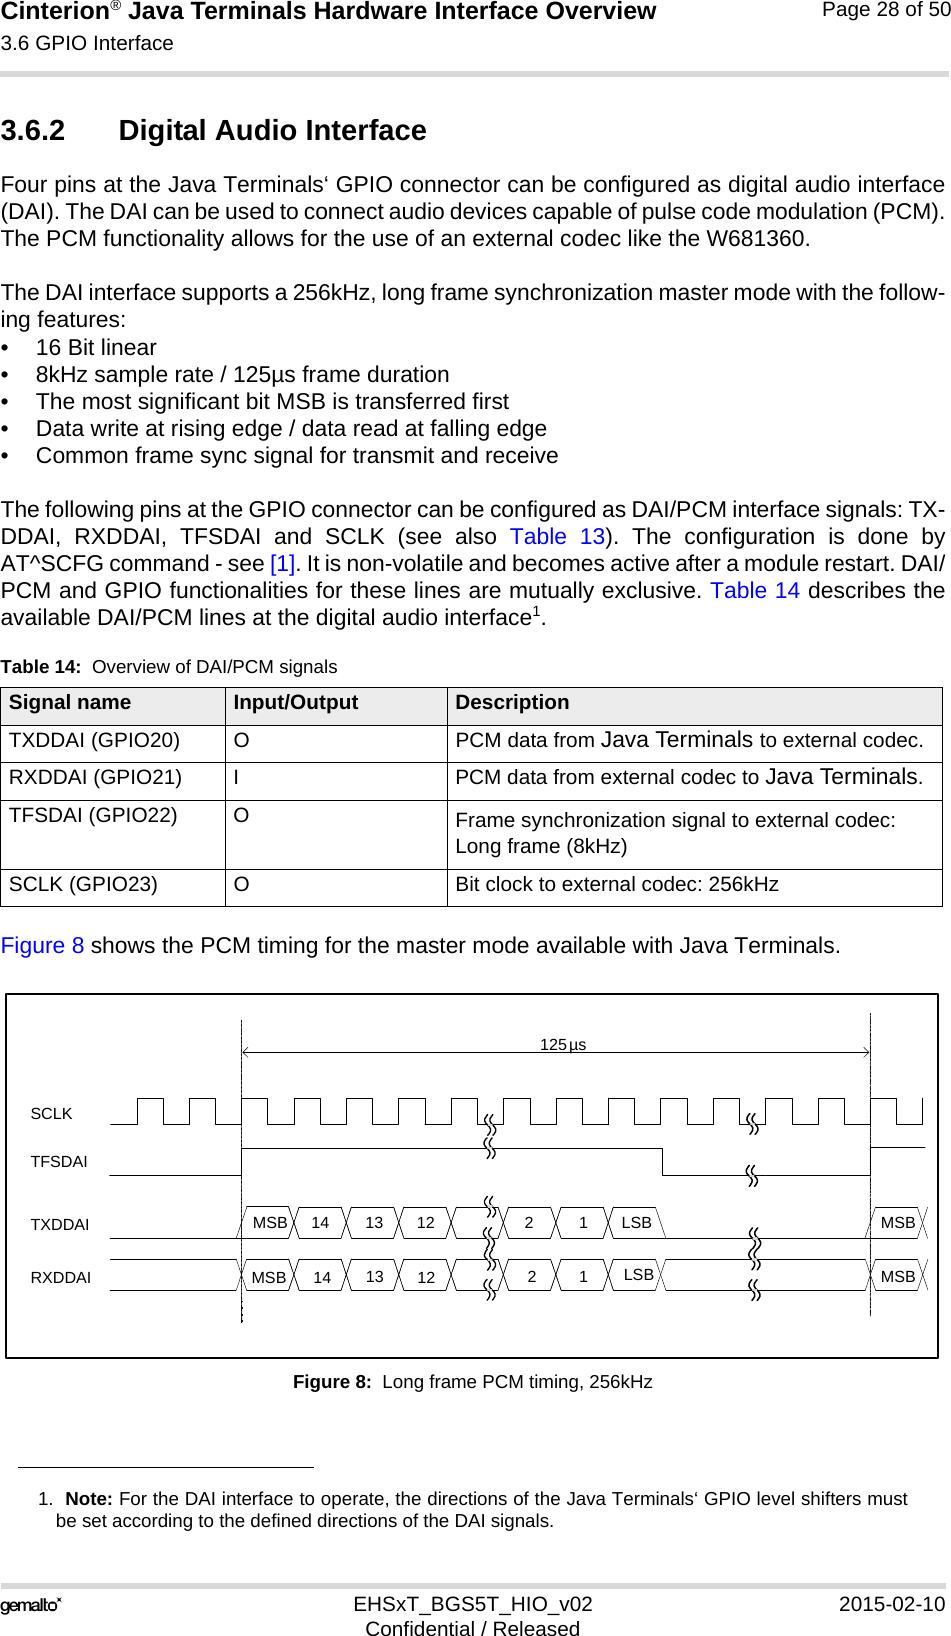 Cinterion® Java Terminals Hardware Interface Overview3.6 GPIO Interface39EHSxT_BGS5T_HIO_v02 2015-02-10Confidential / ReleasedPage 28 of 503.6.2 Digital Audio Interface Four pins at the Java Terminals‘ GPIO connector can be configured as digital audio interface(DAI). The DAI can be used to connect audio devices capable of pulse code modulation (PCM).The PCM functionality allows for the use of an external codec like the W681360. The DAI interface supports a 256kHz, long frame synchronization master mode with the follow-ing features:• 16 Bit linear• 8kHz sample rate / 125µs frame duration• The most significant bit MSB is transferred first• Data write at rising edge / data read at falling edge• Common frame sync signal for transmit and receiveThe following pins at the GPIO connector can be configured as DAI/PCM interface signals: TX-DDAI, RXDDAI, TFSDAI and SCLK (see also Table 13). The configuration is done byAT^SCFG command - see [1]. It is non-volatile and becomes active after a module restart. DAI/PCM and GPIO functionalities for these lines are mutually exclusive. Table 14 describes theavailable DAI/PCM lines at the digital audio interface1. Figure 8 shows the PCM timing for the master mode available with Java Terminals.Figure 8:  Long frame PCM timing, 256kHz1.  Note: For the DAI interface to operate, the directions of the Java Terminals‘ GPIO level shifters mustbe set according to the defined directions of the DAI signals. Table 14:  Overview of DAI/PCM signalsSignal name Input/Output DescriptionTXDDAI (GPIO20) O PCM data from Java Terminals to external codec.RXDDAI (GPIO21) I PCM data from external codec to Java Terminals.TFSDAI (GPIO22) O Frame synchronization signal to external codec:Long frame (8kHz)SCLK (GPIO23) O Bit clock to external codec: 256kHz SCLK  TXDDAI  RXDDAI  TFSDAI  MSB  MSB  LSB  LSB  14  13  14  13  1 1 12  12  2 2 MSB  MSB  125   µs  